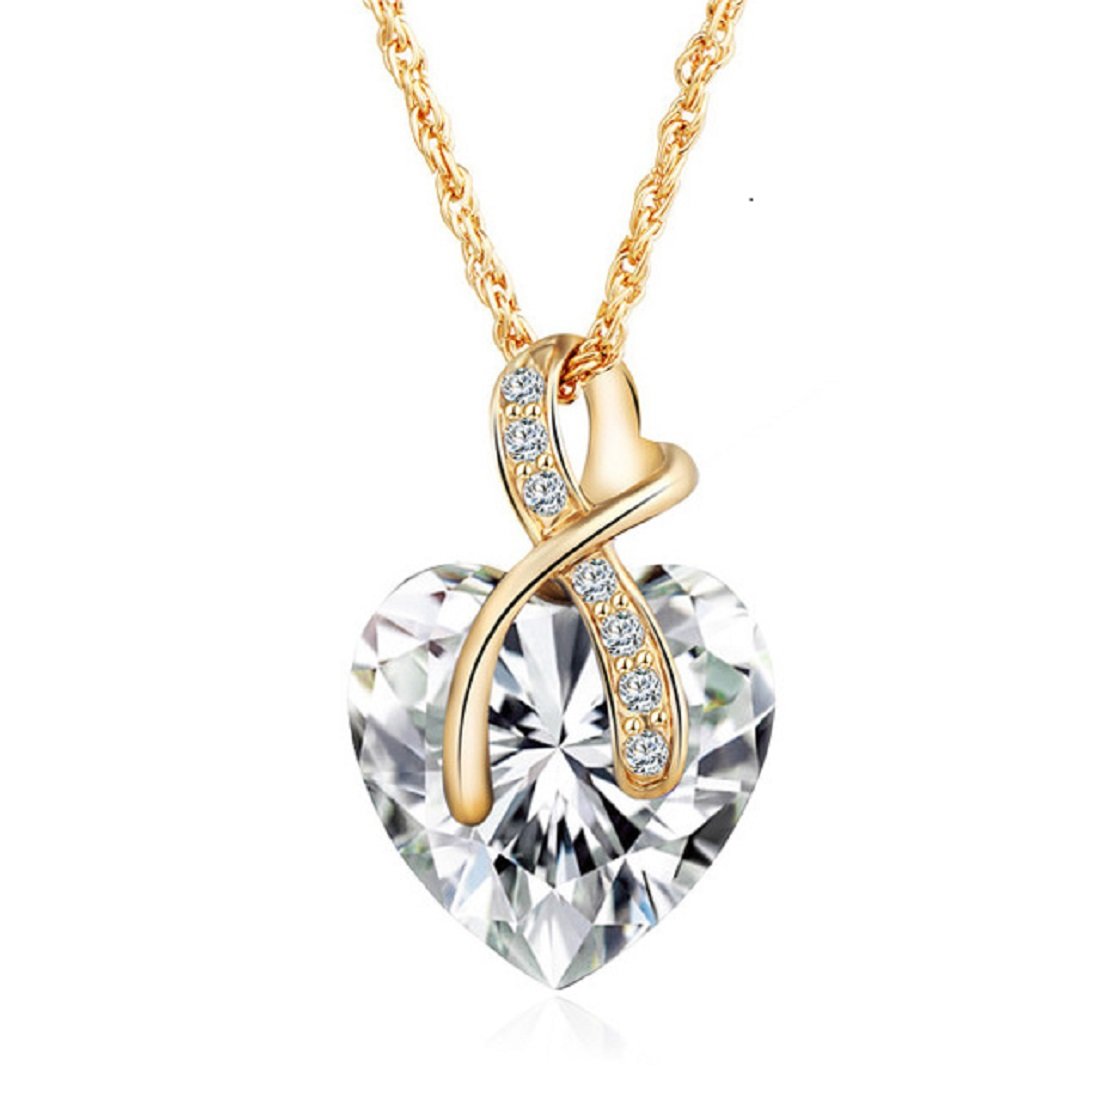 Clear White Austrian Crystal Heart Pendant Necklace For Women - SHOPWITHSTYLE